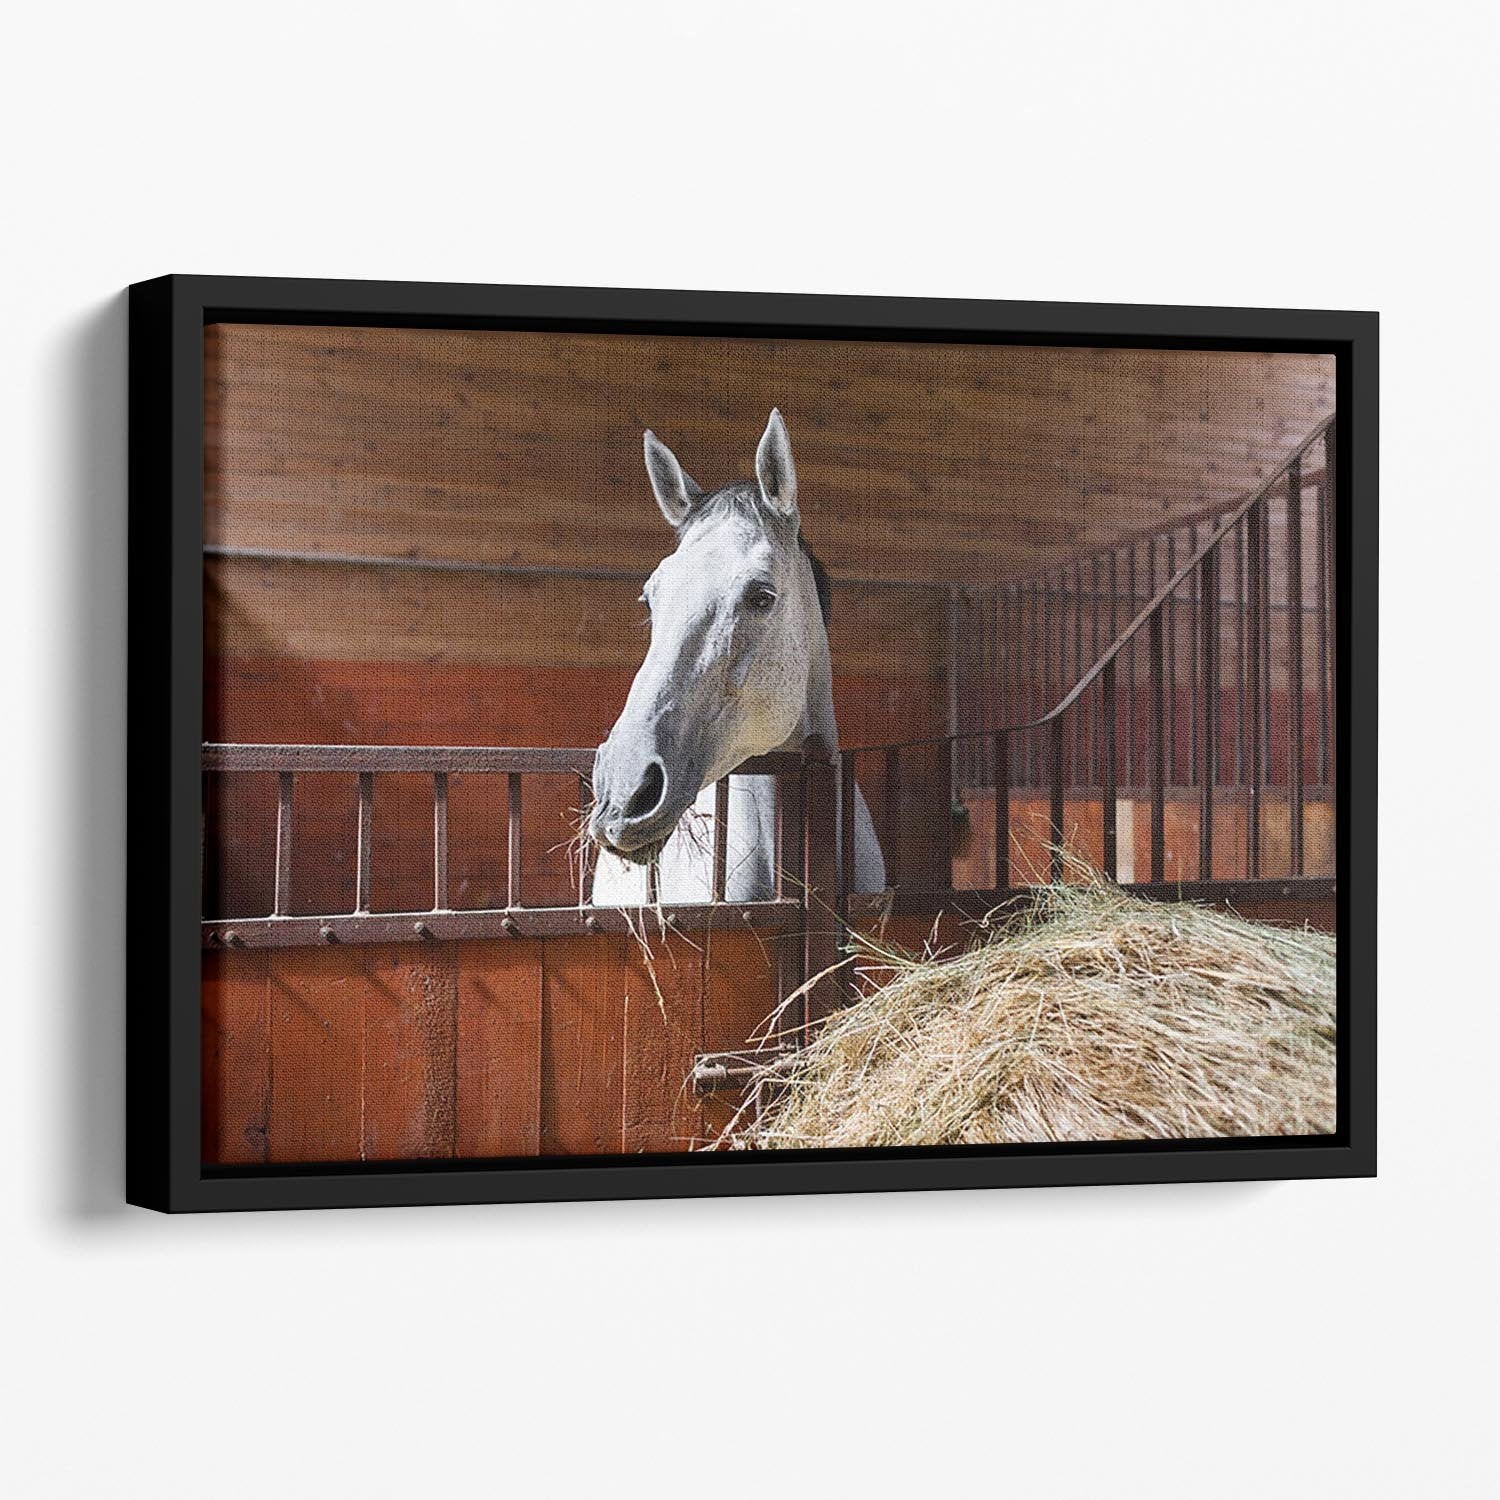 White horse eating hay in the stable Floating Framed Canvas - Canvas Art Rocks - 1